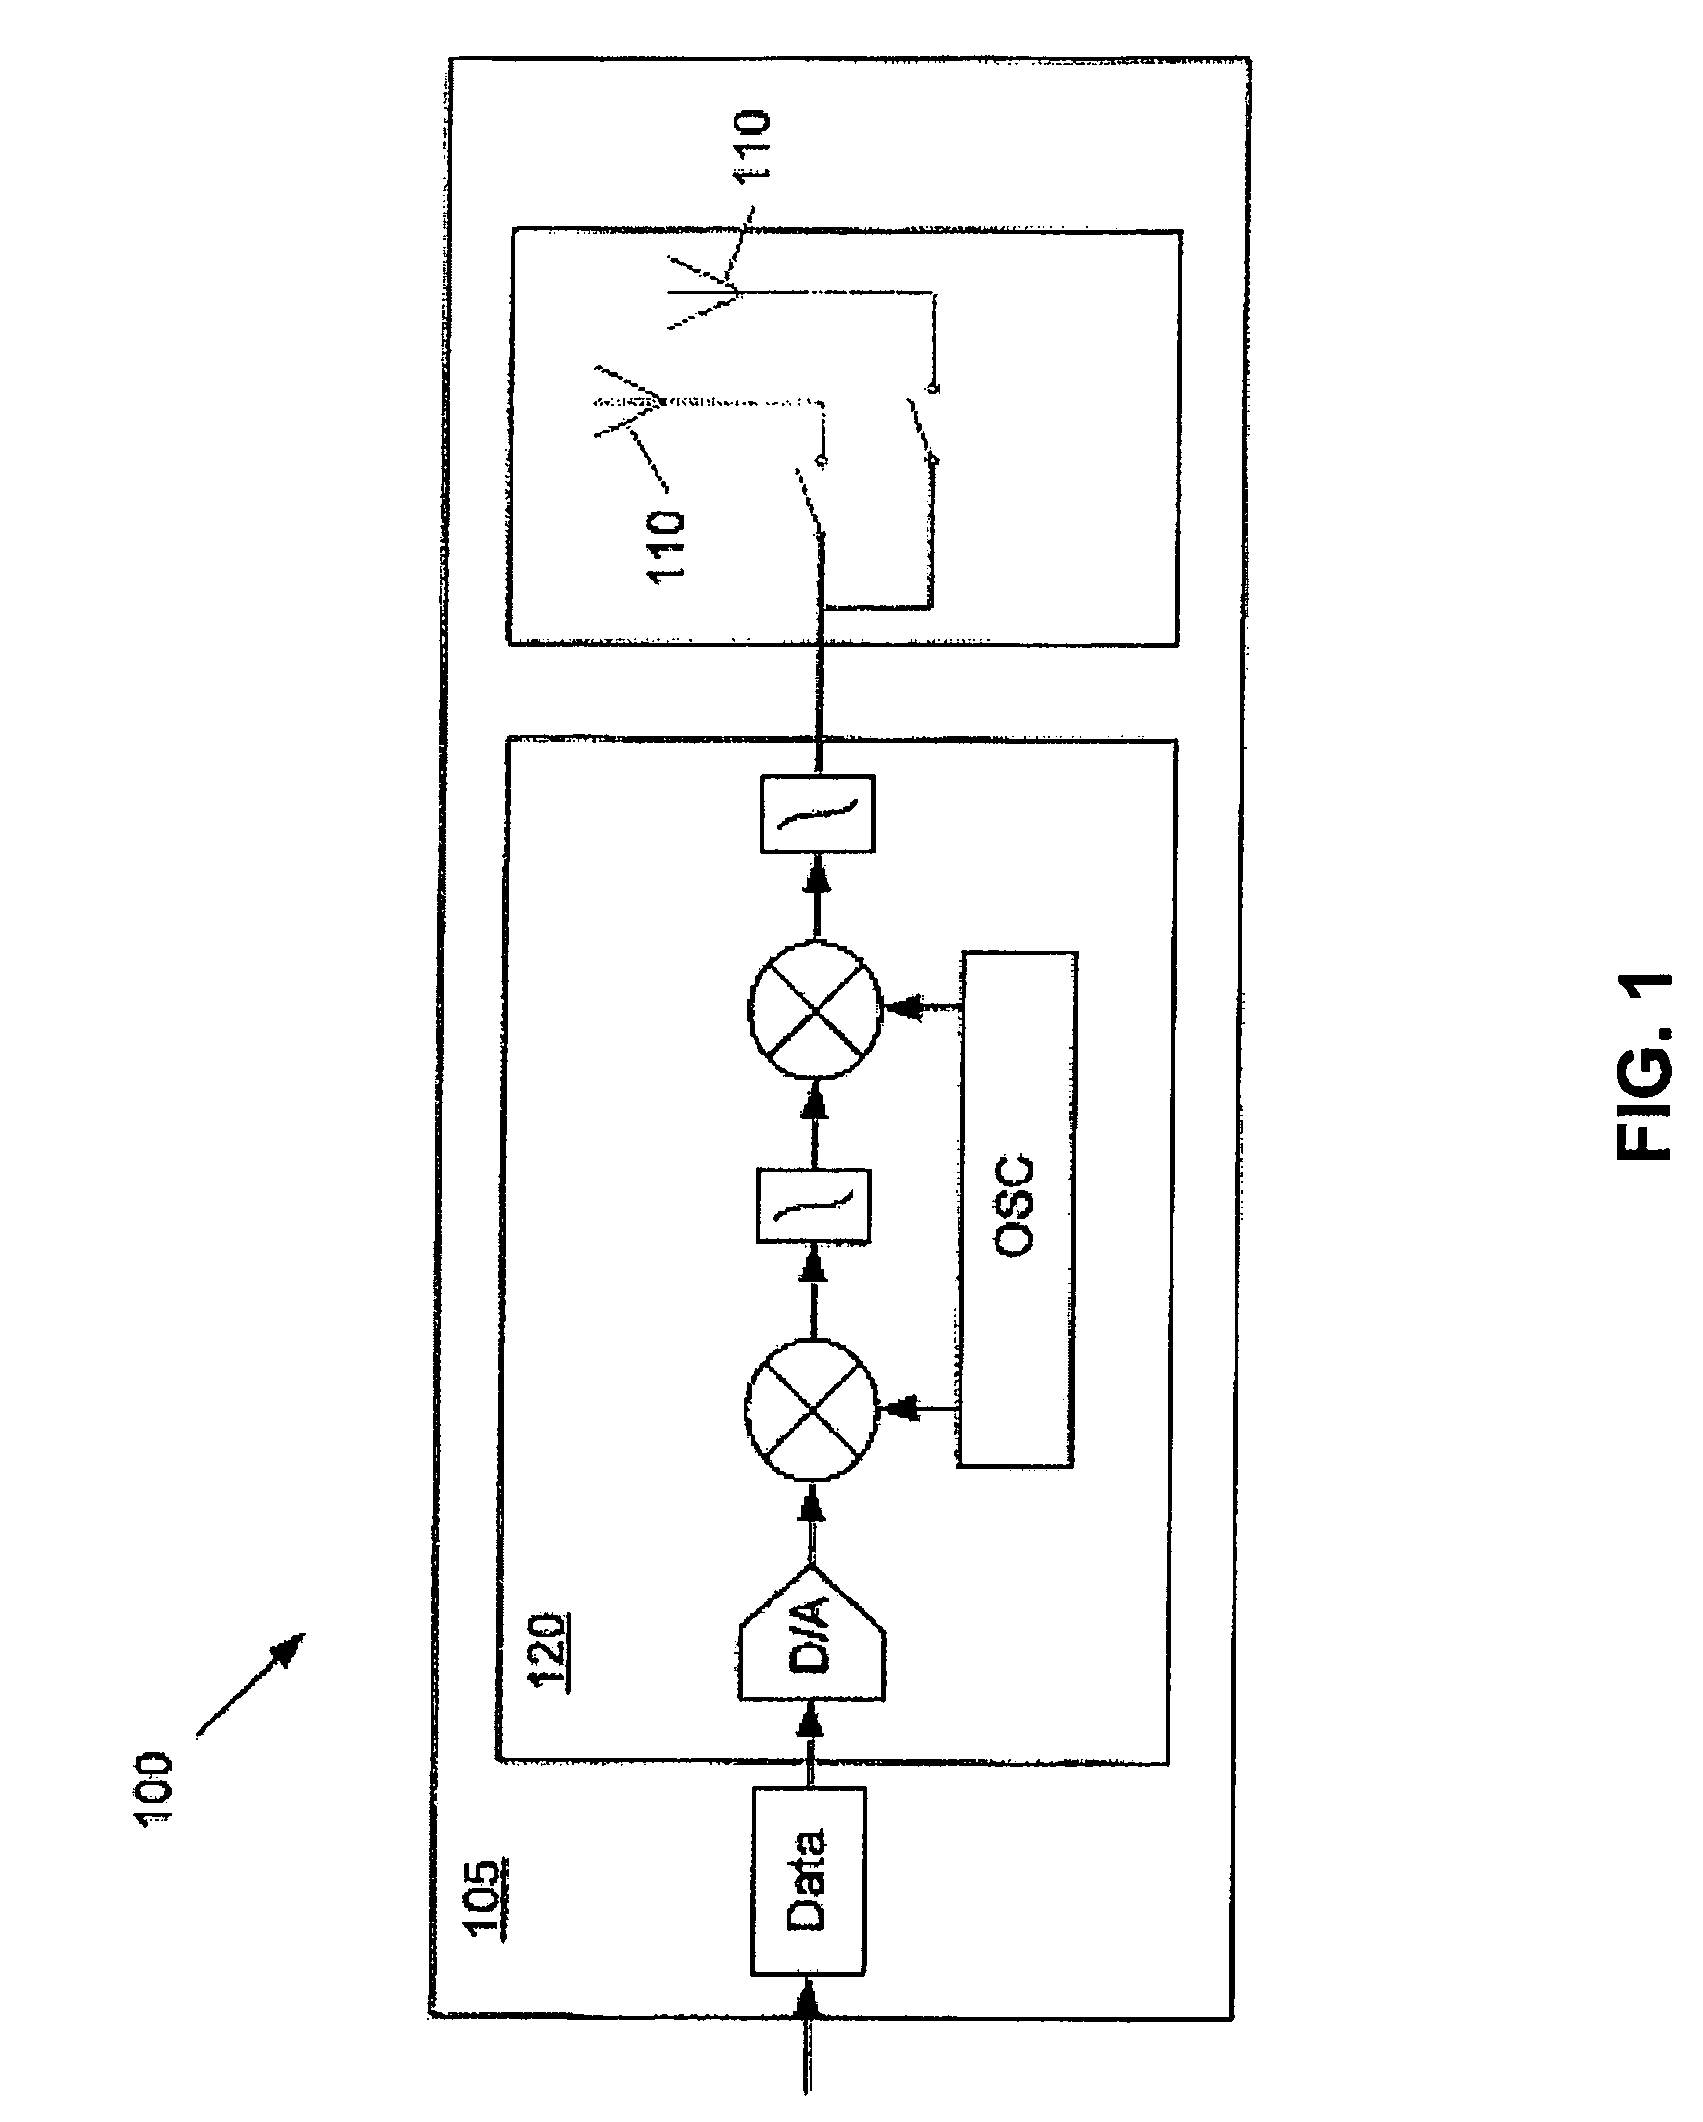 Circuit board having a peripheral antenna apparatus with selectable antenna elements and selectable phase shifting